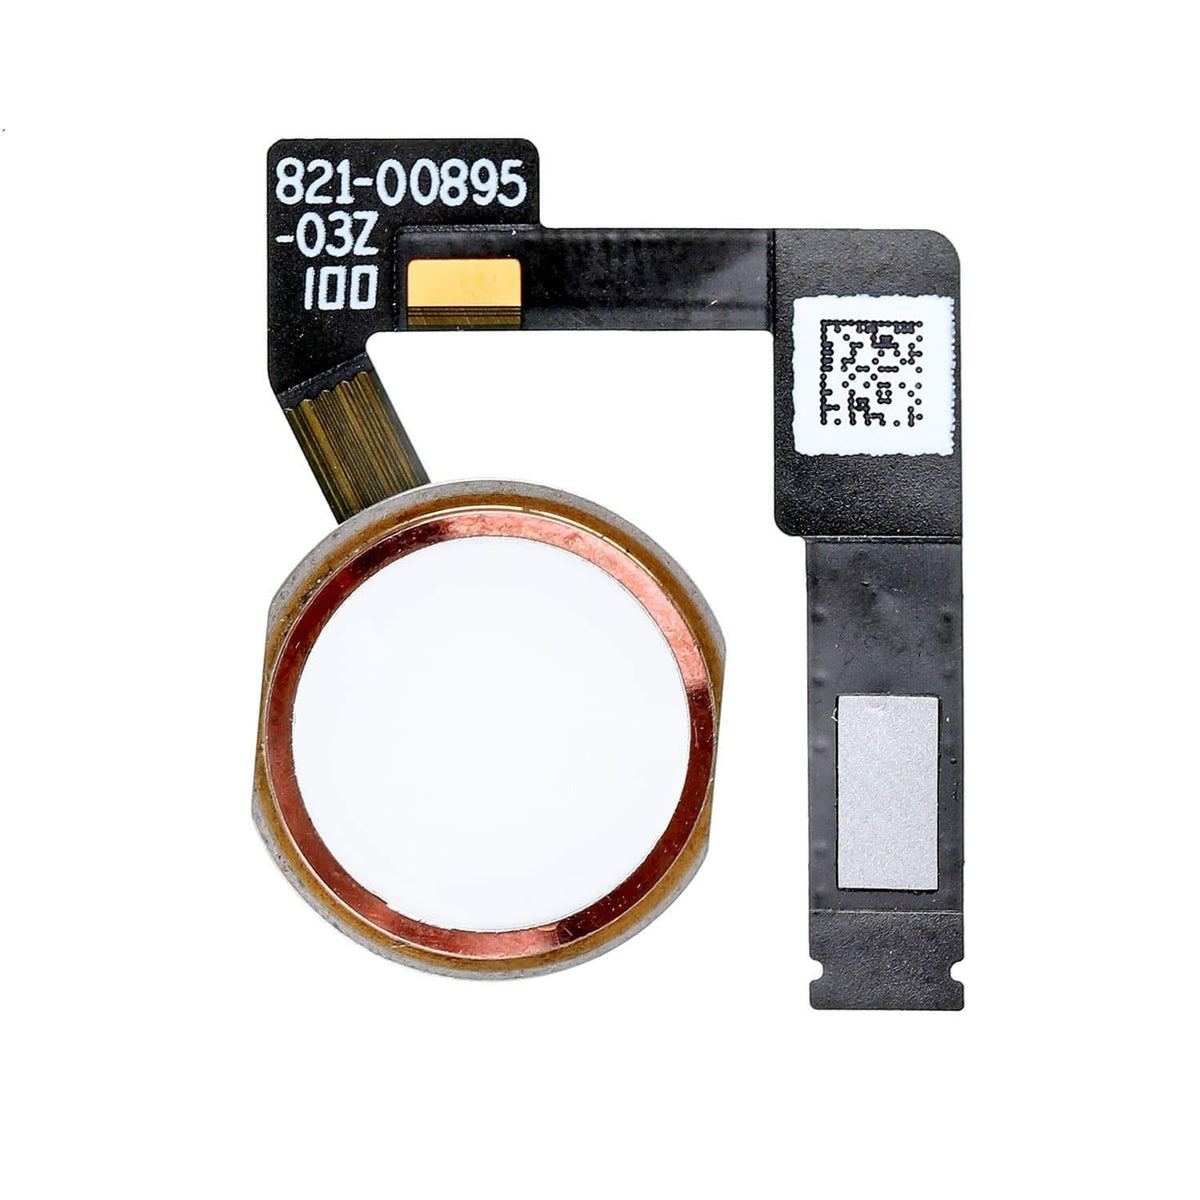 HOME BUTTON ASSEMBLY WITH FLEX CABLE RIBBON FOR IPAD AIR 3/ PRO 10.5" 1ST/12.9" 2ND GEN- ROSE GOLD